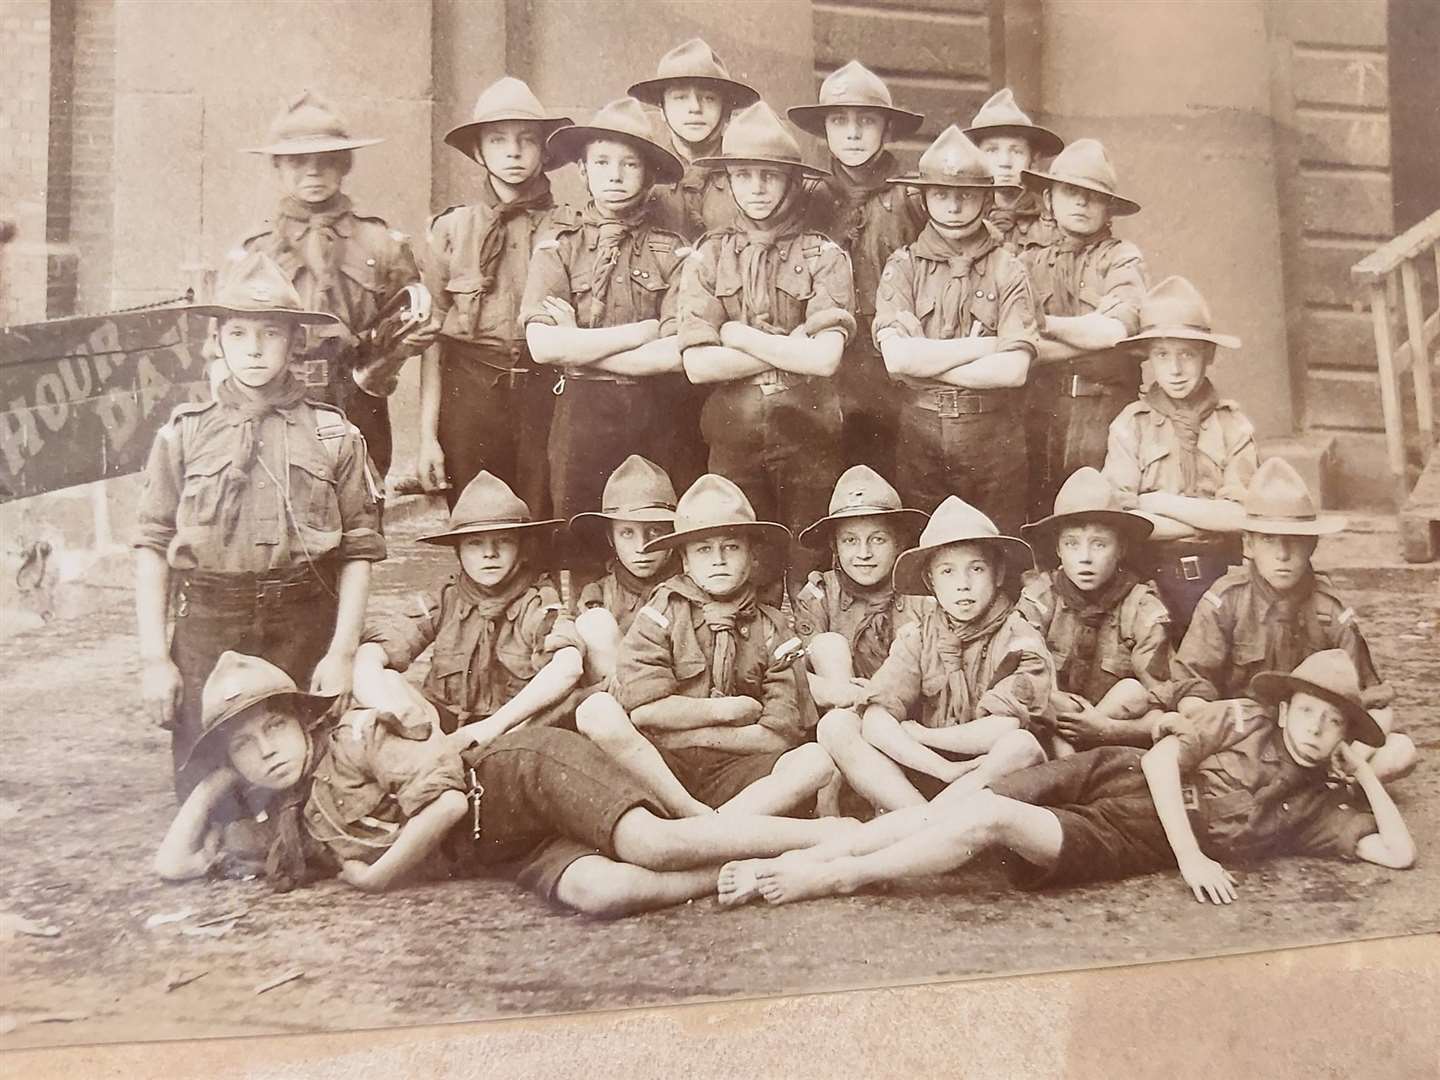 Boy Scouts from 2nd Walworth Troop. Eight died when the training ship Arethusa capsized in a squall off Leysdown, Sheppey, in August 1912. Picture: Steve Uggles. His grandfather's brother was one of the boys who drowned